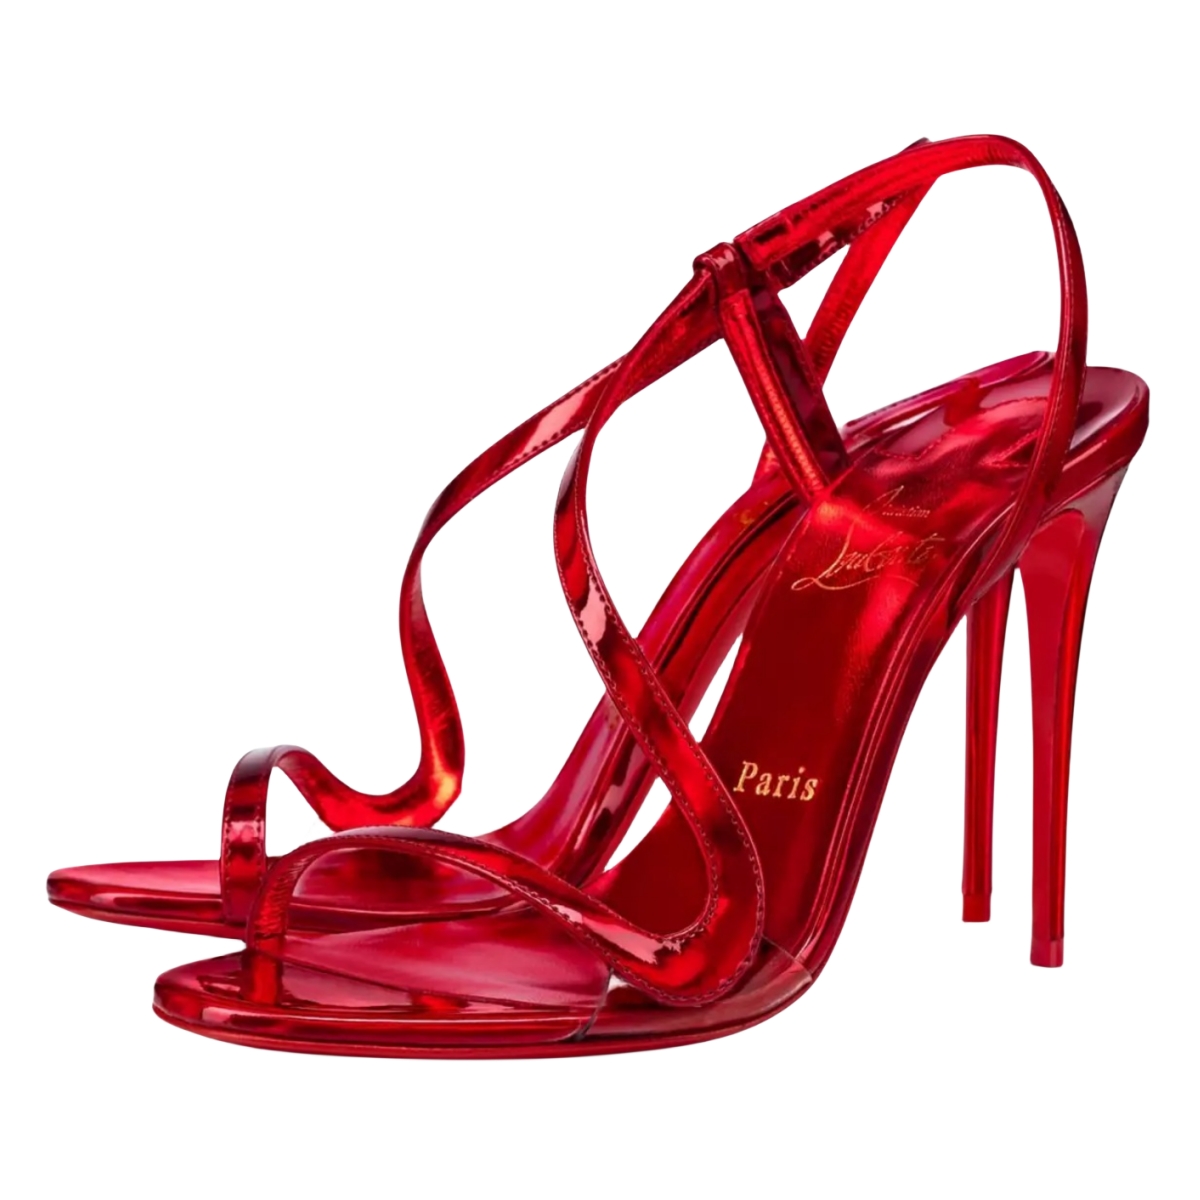 Rosalie 100 mm Sandals Leather and PVC Red